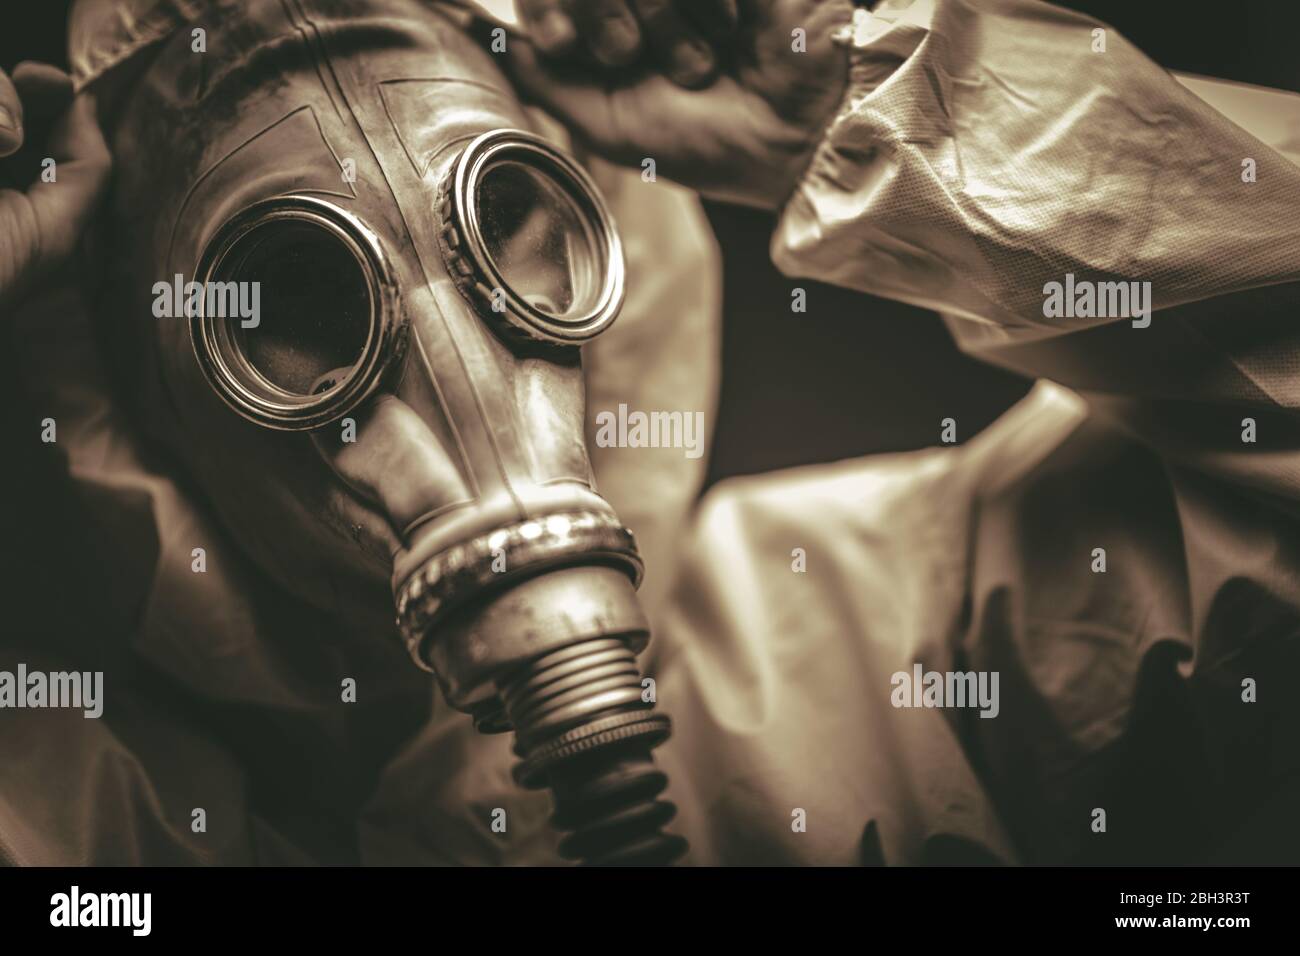 Close-Up Of Male In Full Hazmat Suit Protectiver Gear And Gas Mask. Stock Photo